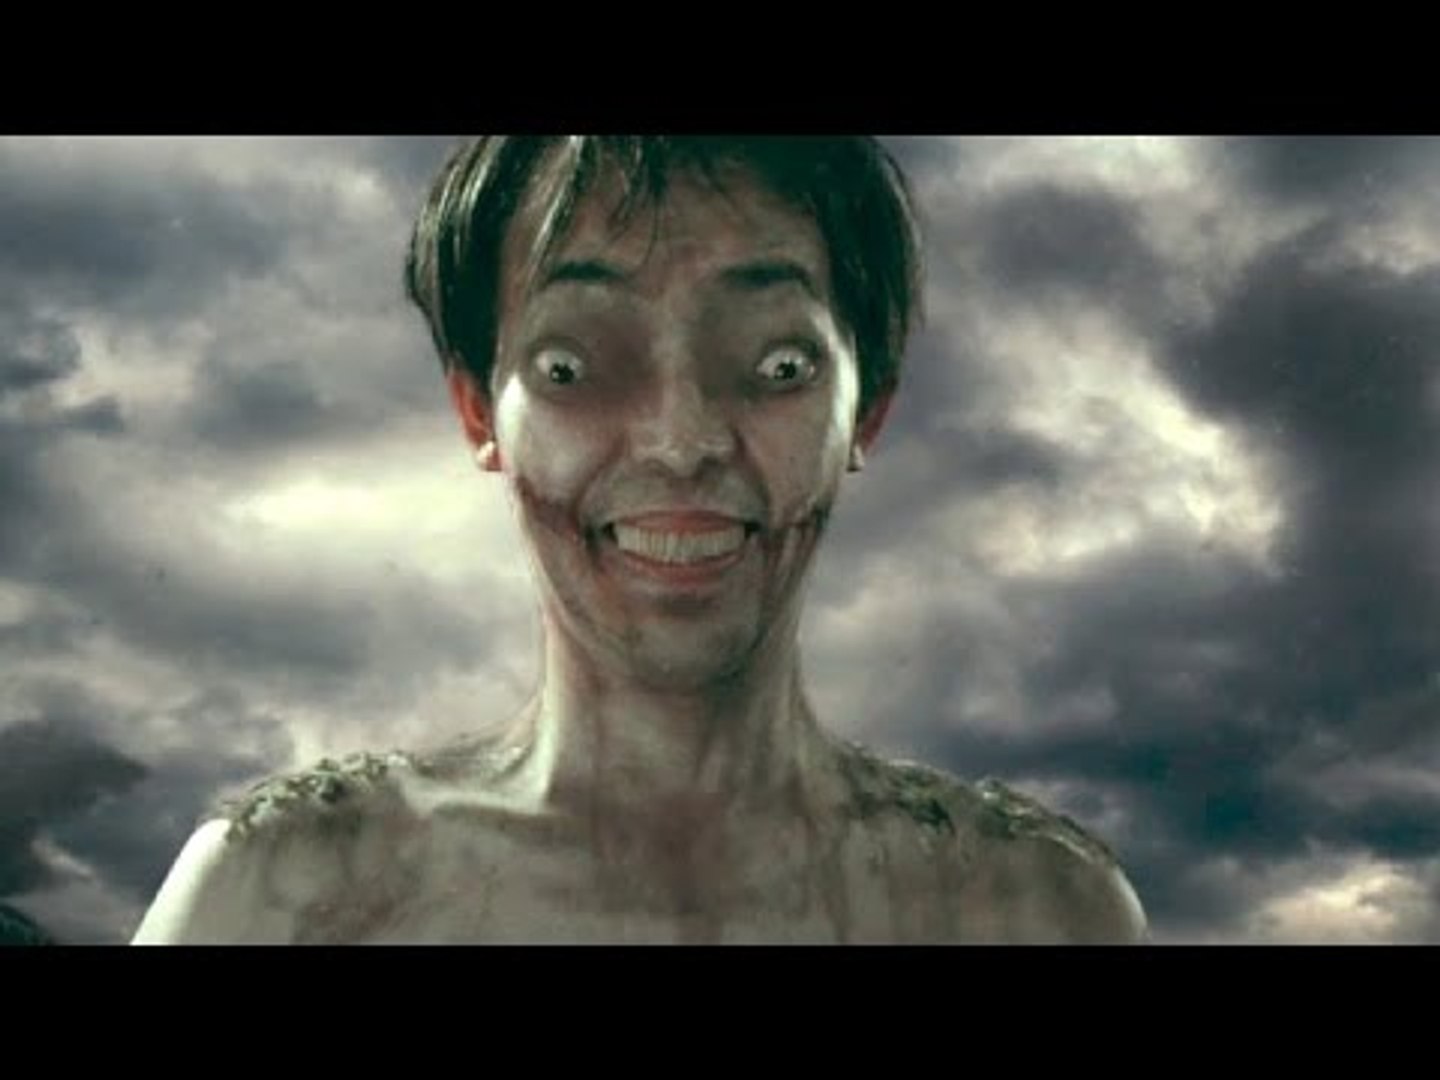 Attack on Titan - Official Trailer 